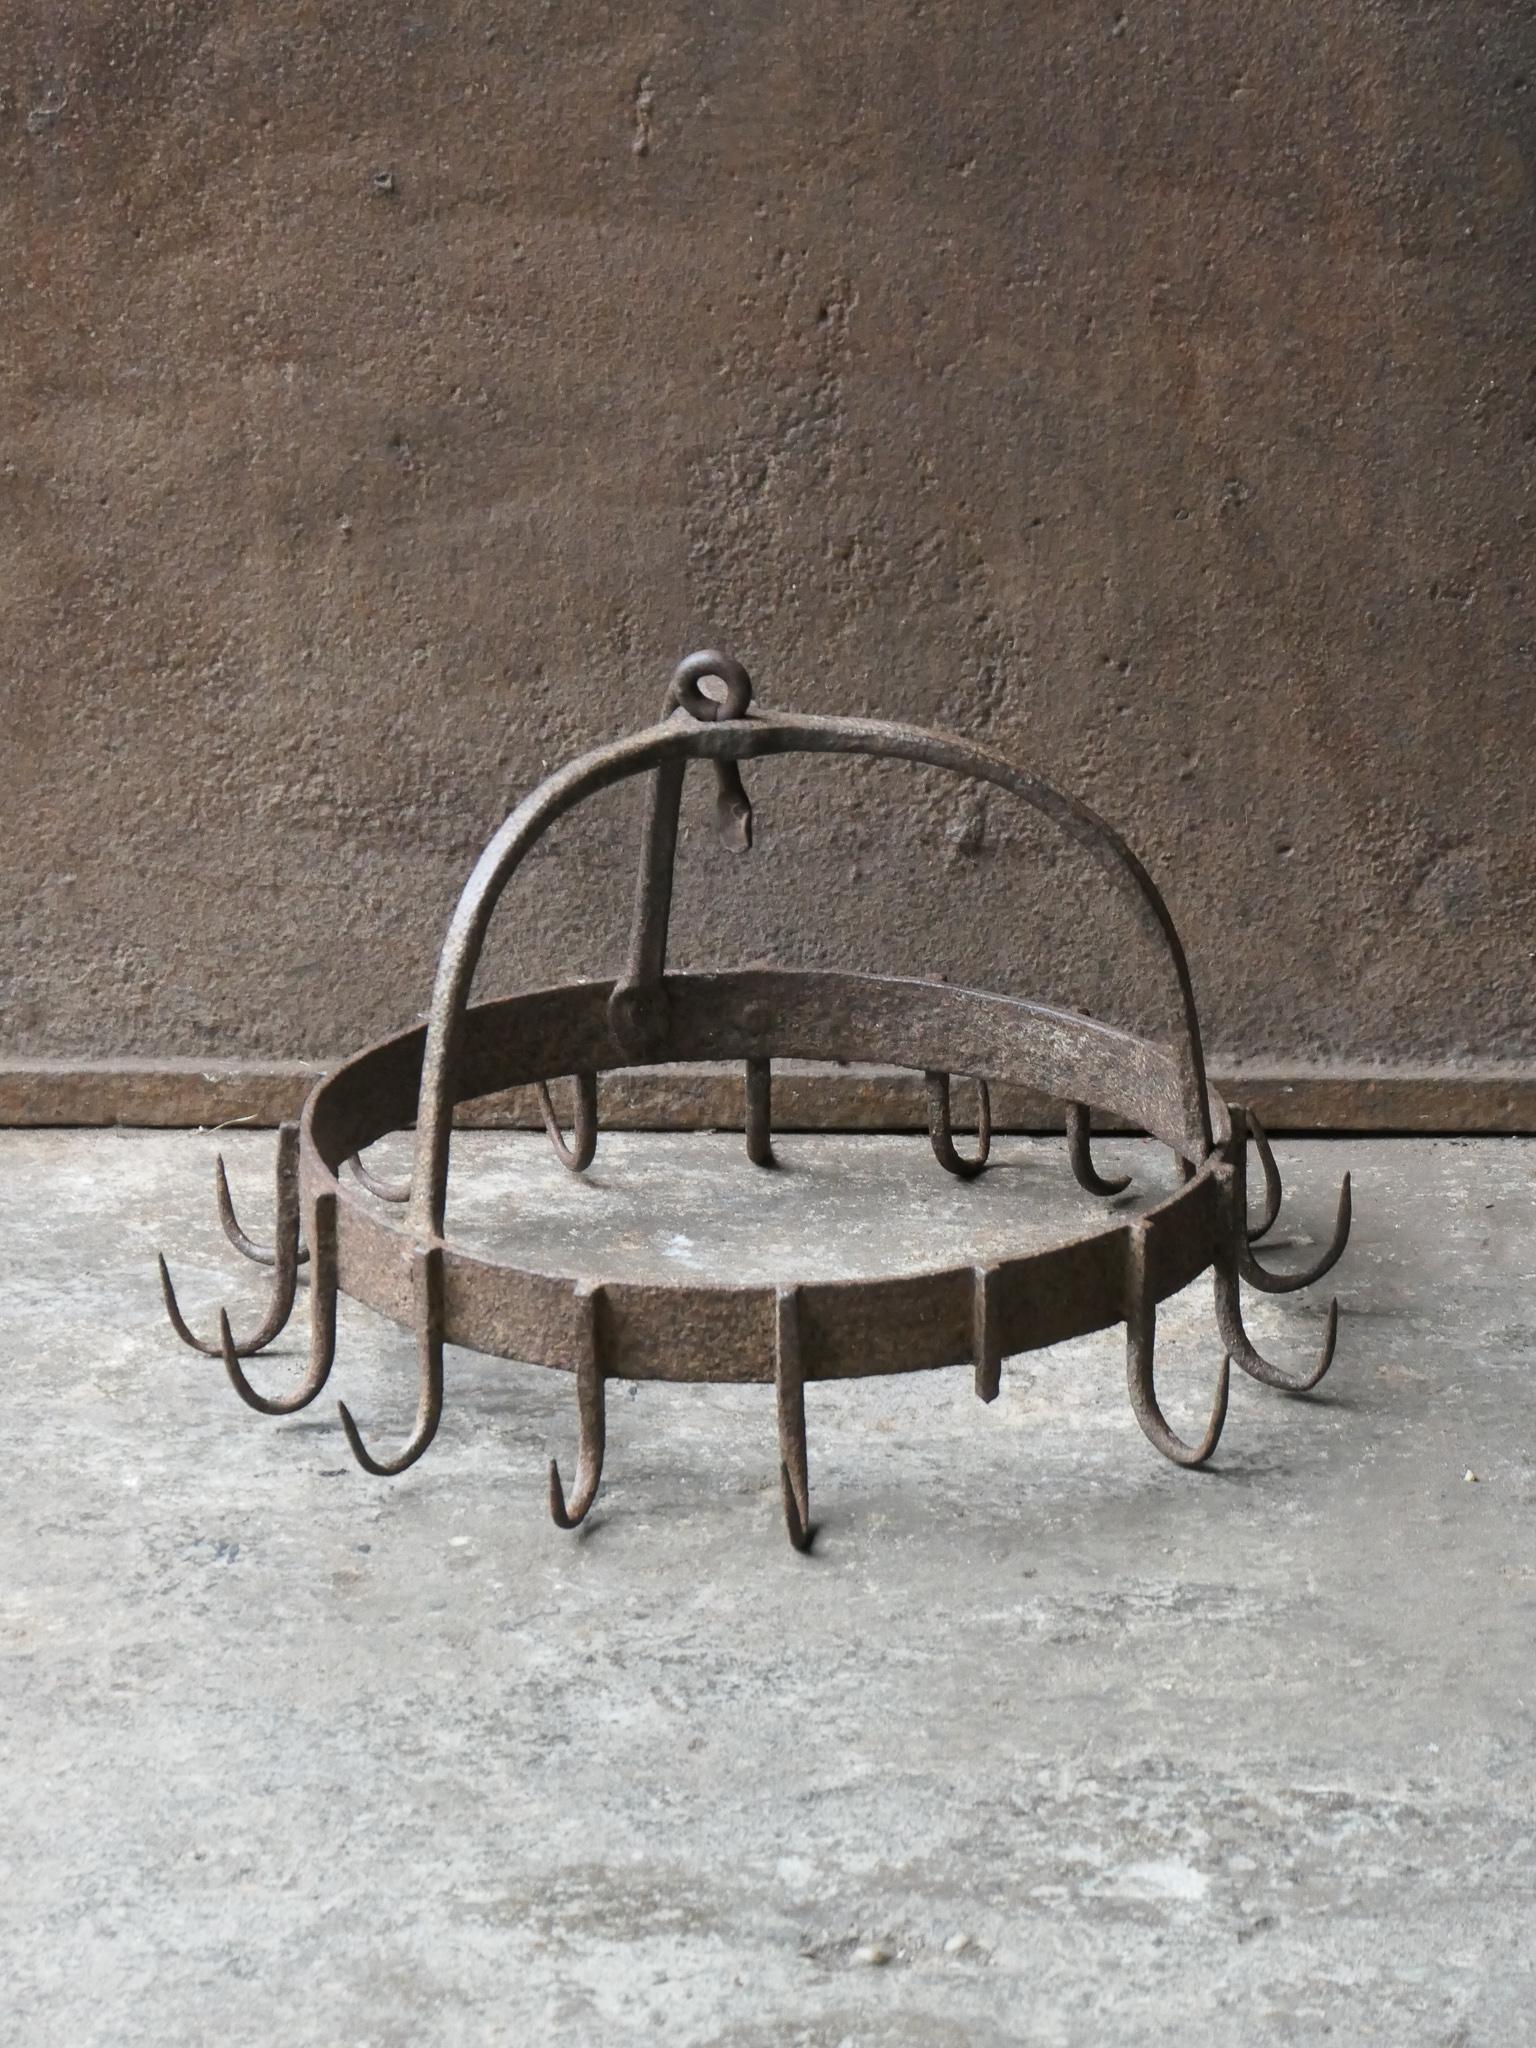 18th century French Louis XV game rack used for hanging game and birds. The crown is made of wrought iron and is in a good condition.